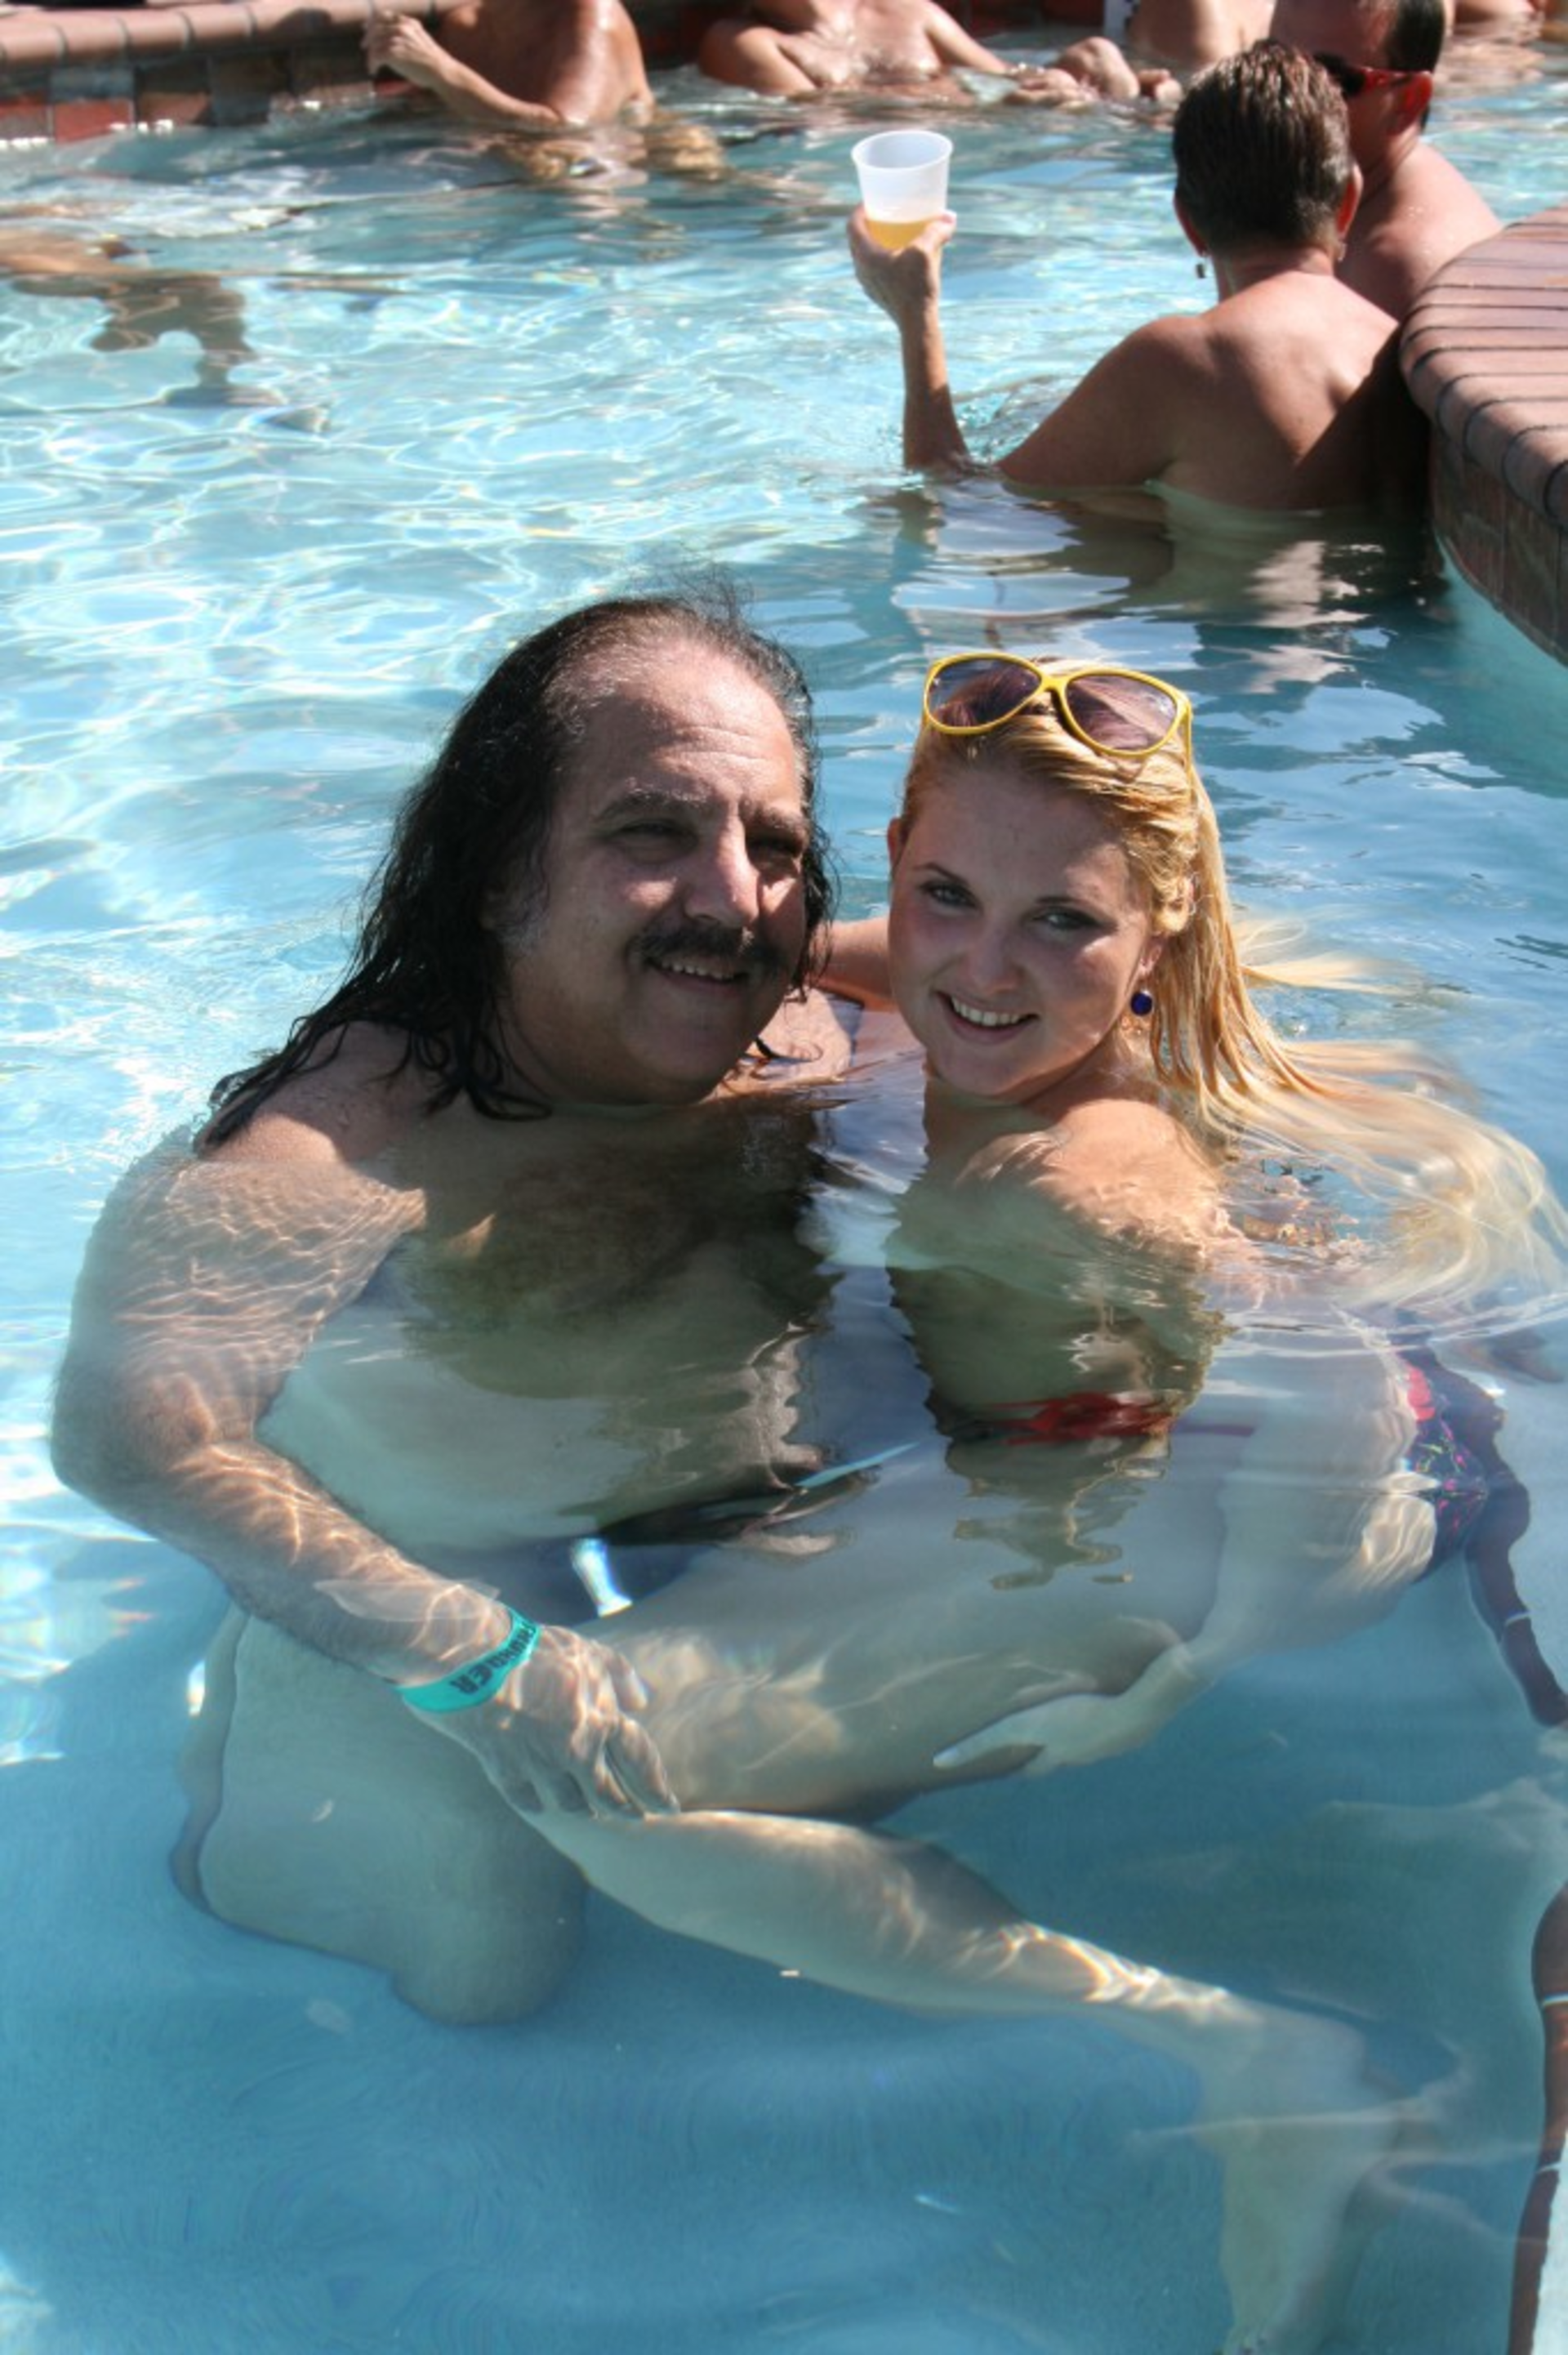 Ron Jeremy on prolonging the climax in sex and his career (NSFW) Tampa Bay News Tampa Creative Loafing Tampa pic